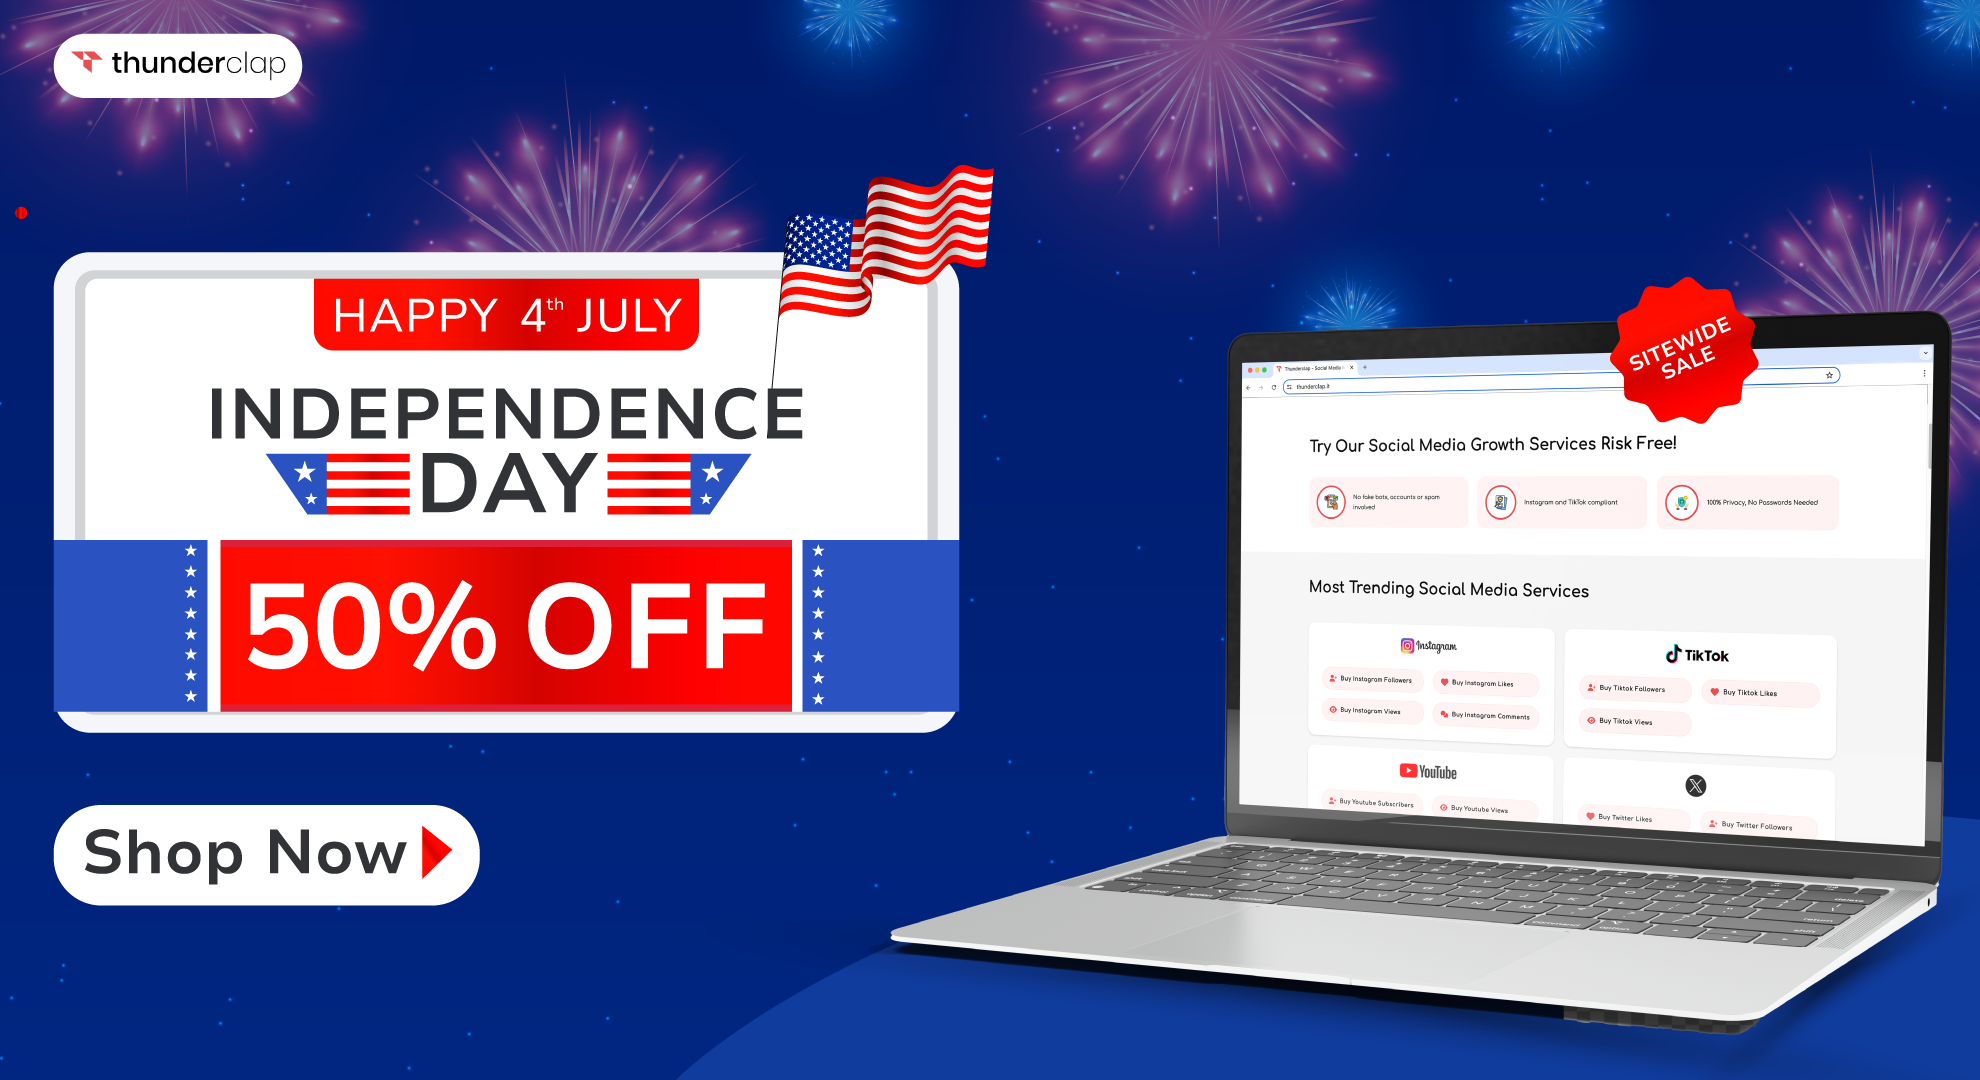 independence day sale sitewide on thunderclap it